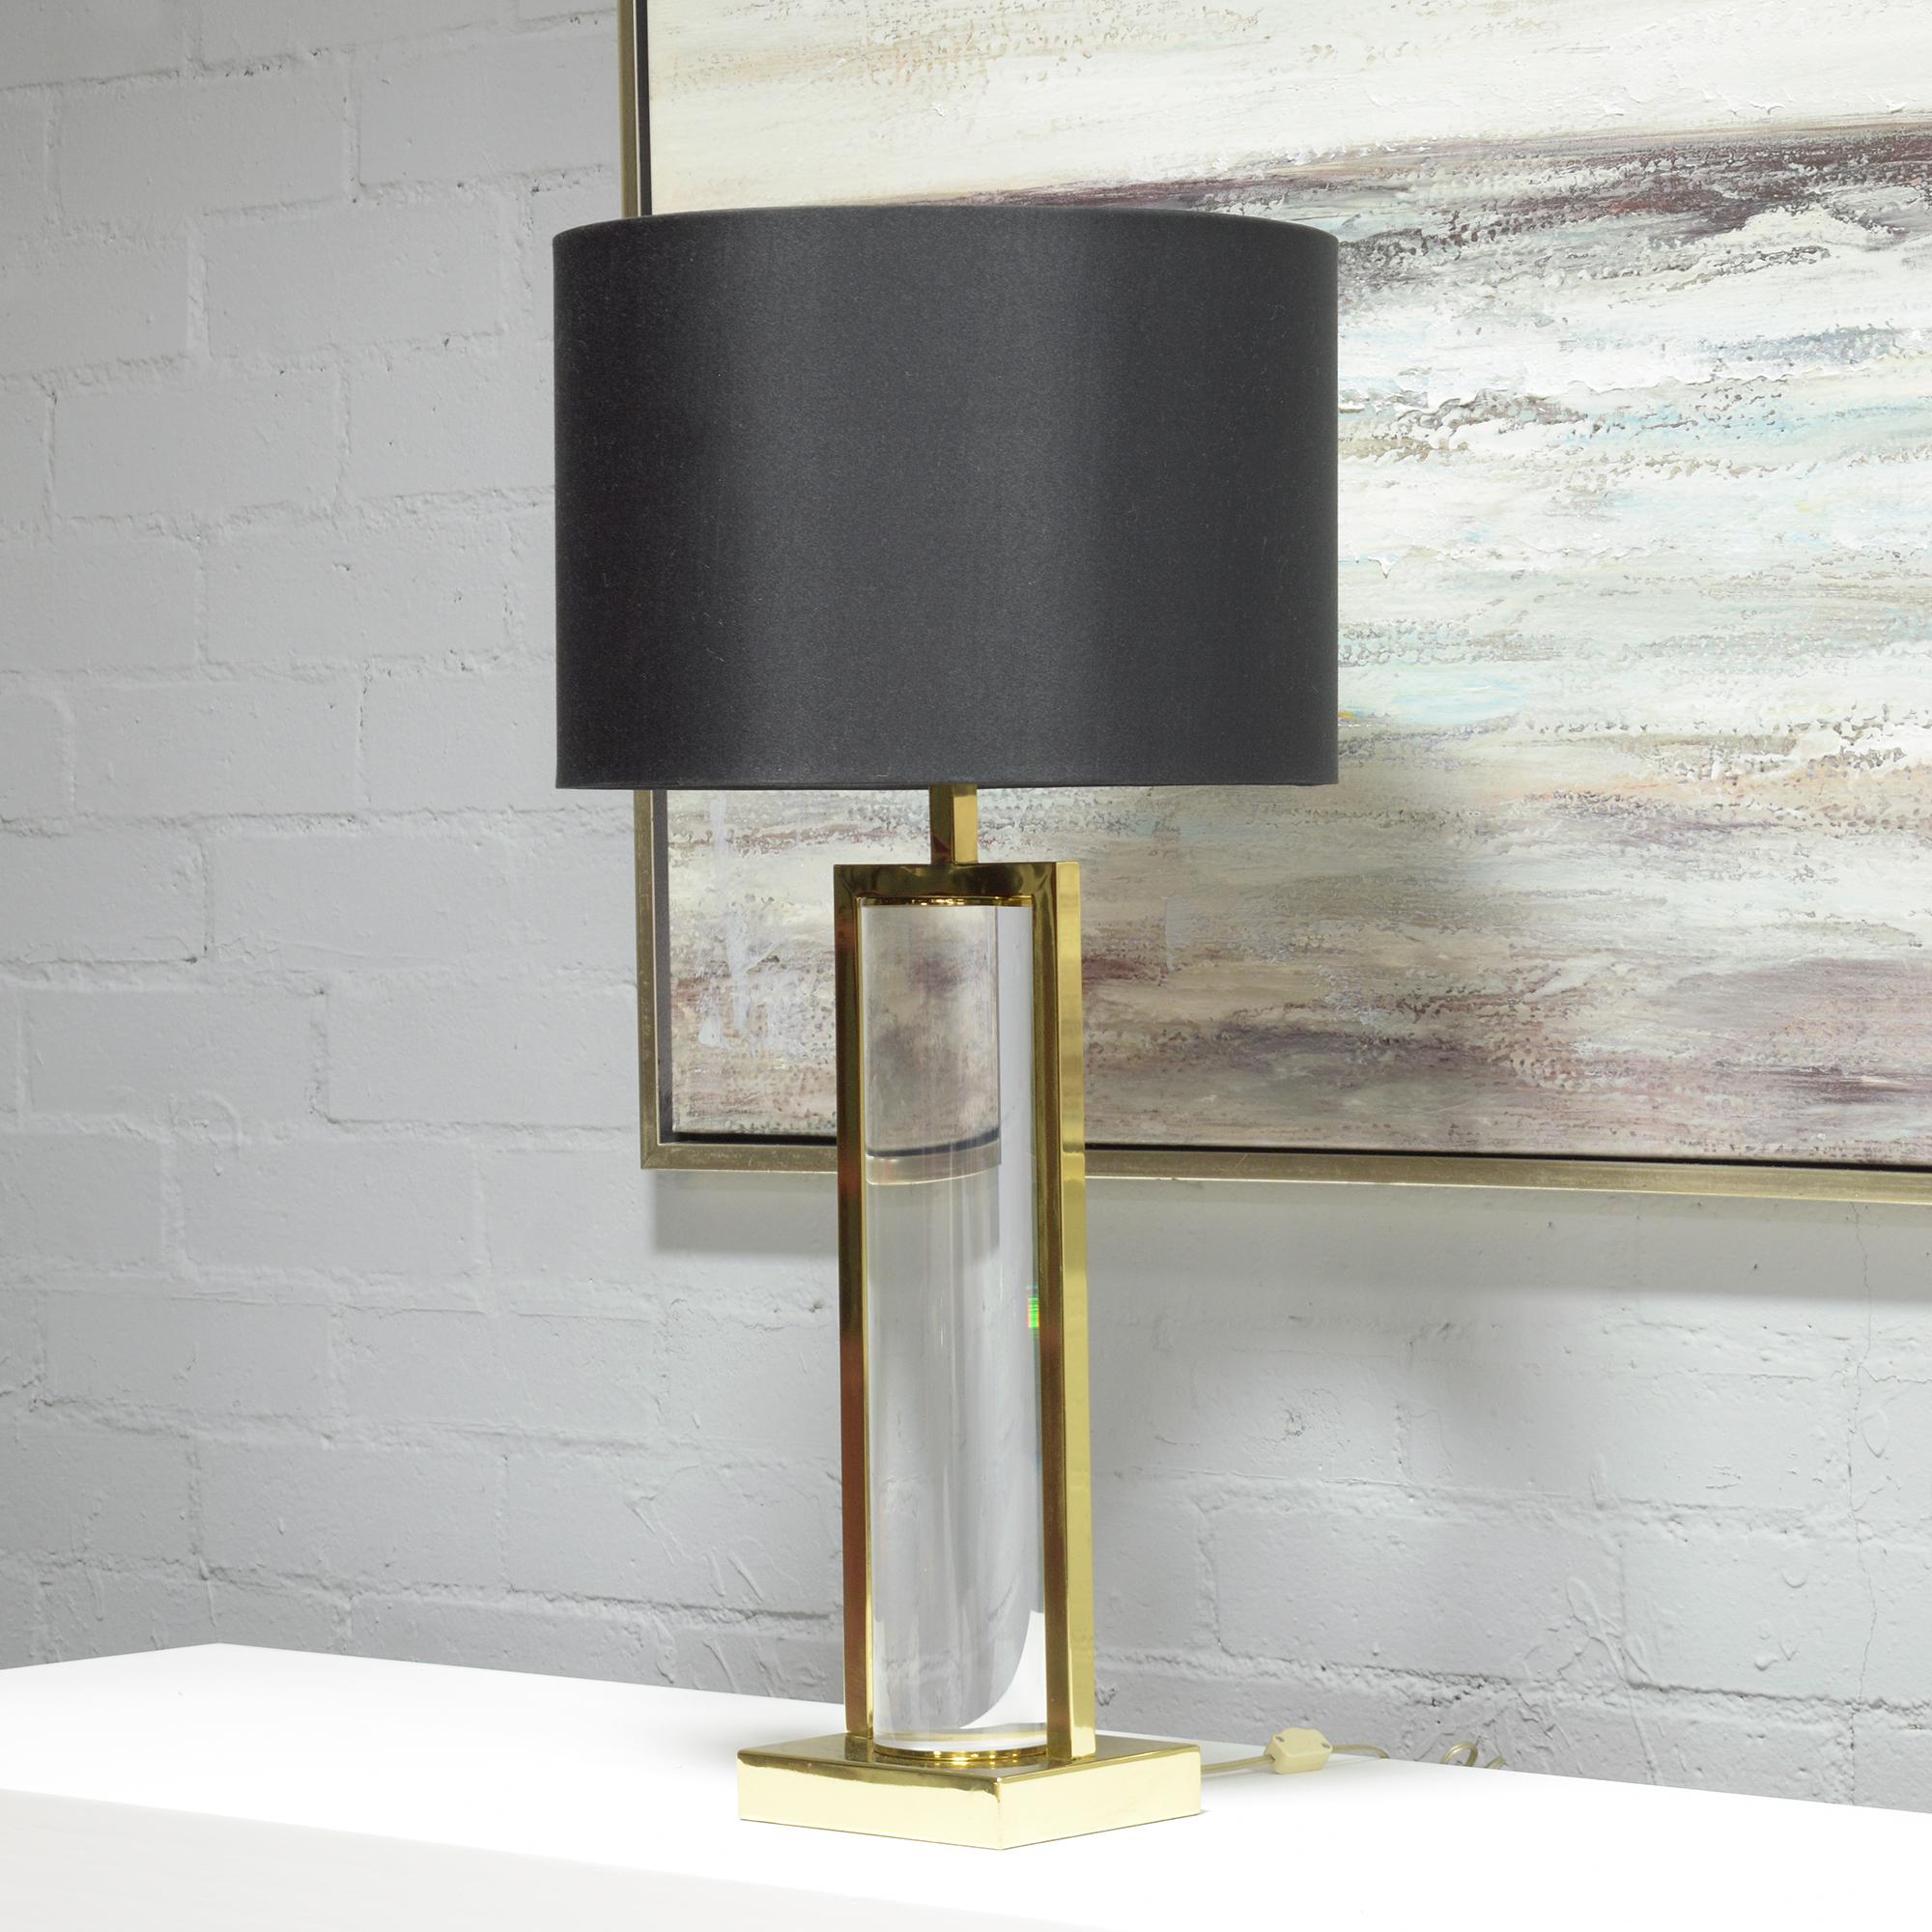 American Mid-Century Modern Brass & Lucite Table Lamp: Vintage Elegance Revived For Sale